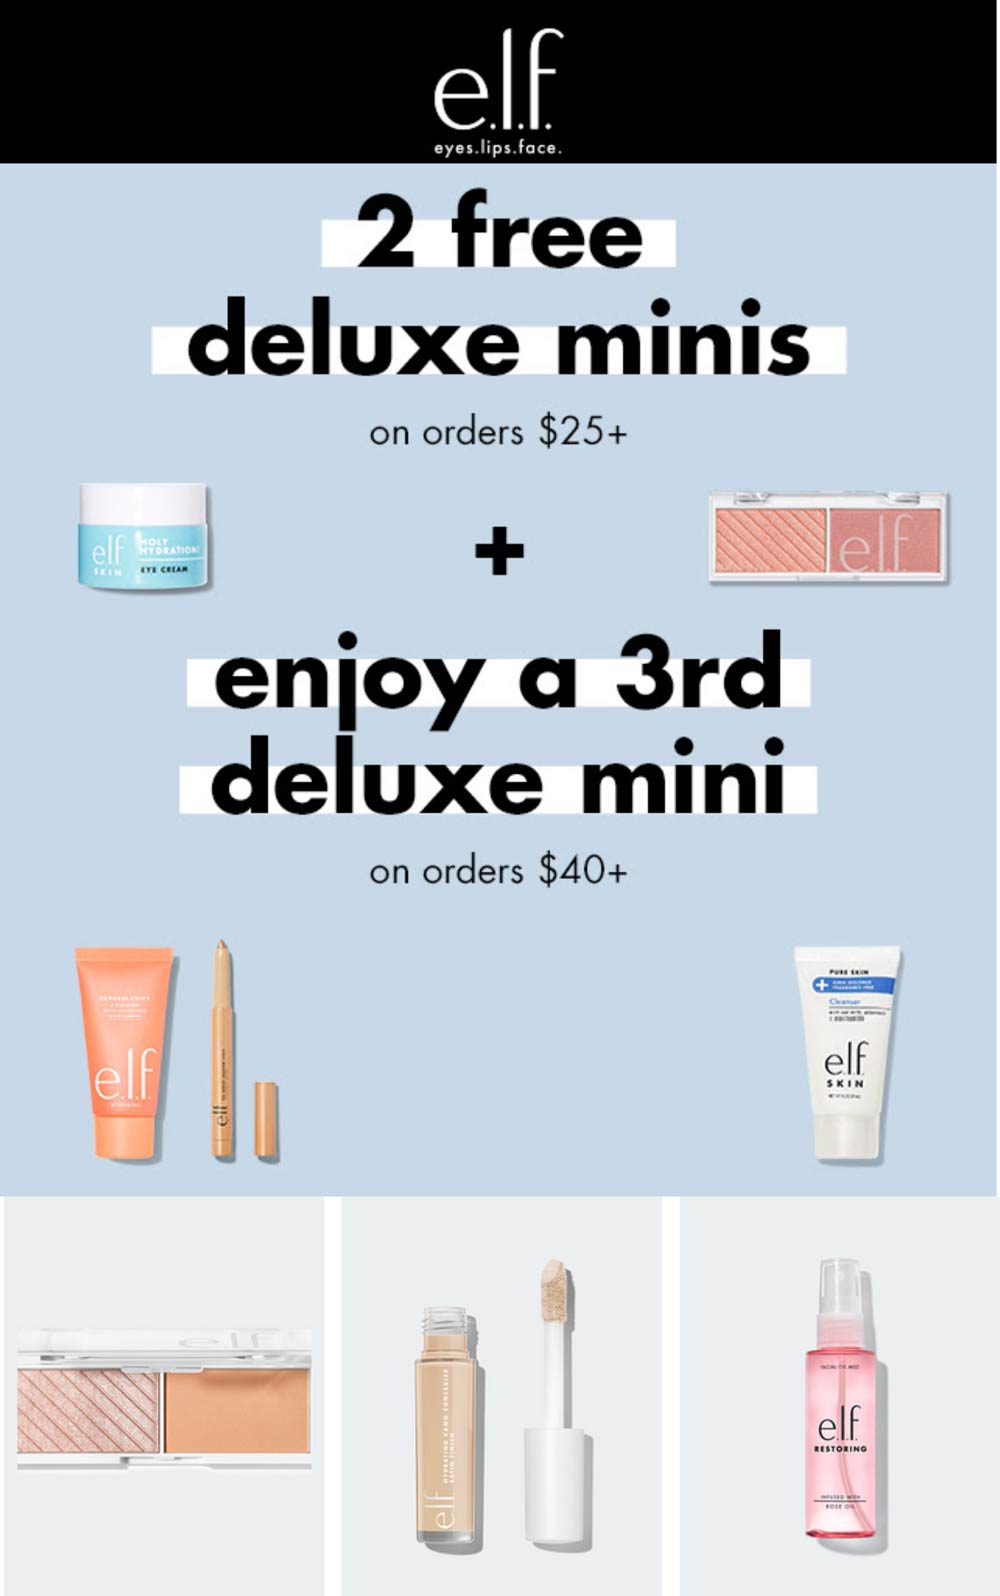 e.l.f. Cosmetics stores Coupon  Free deluxe minis on $25+ at e.l.f. Cosmetics #elfcosmetics 